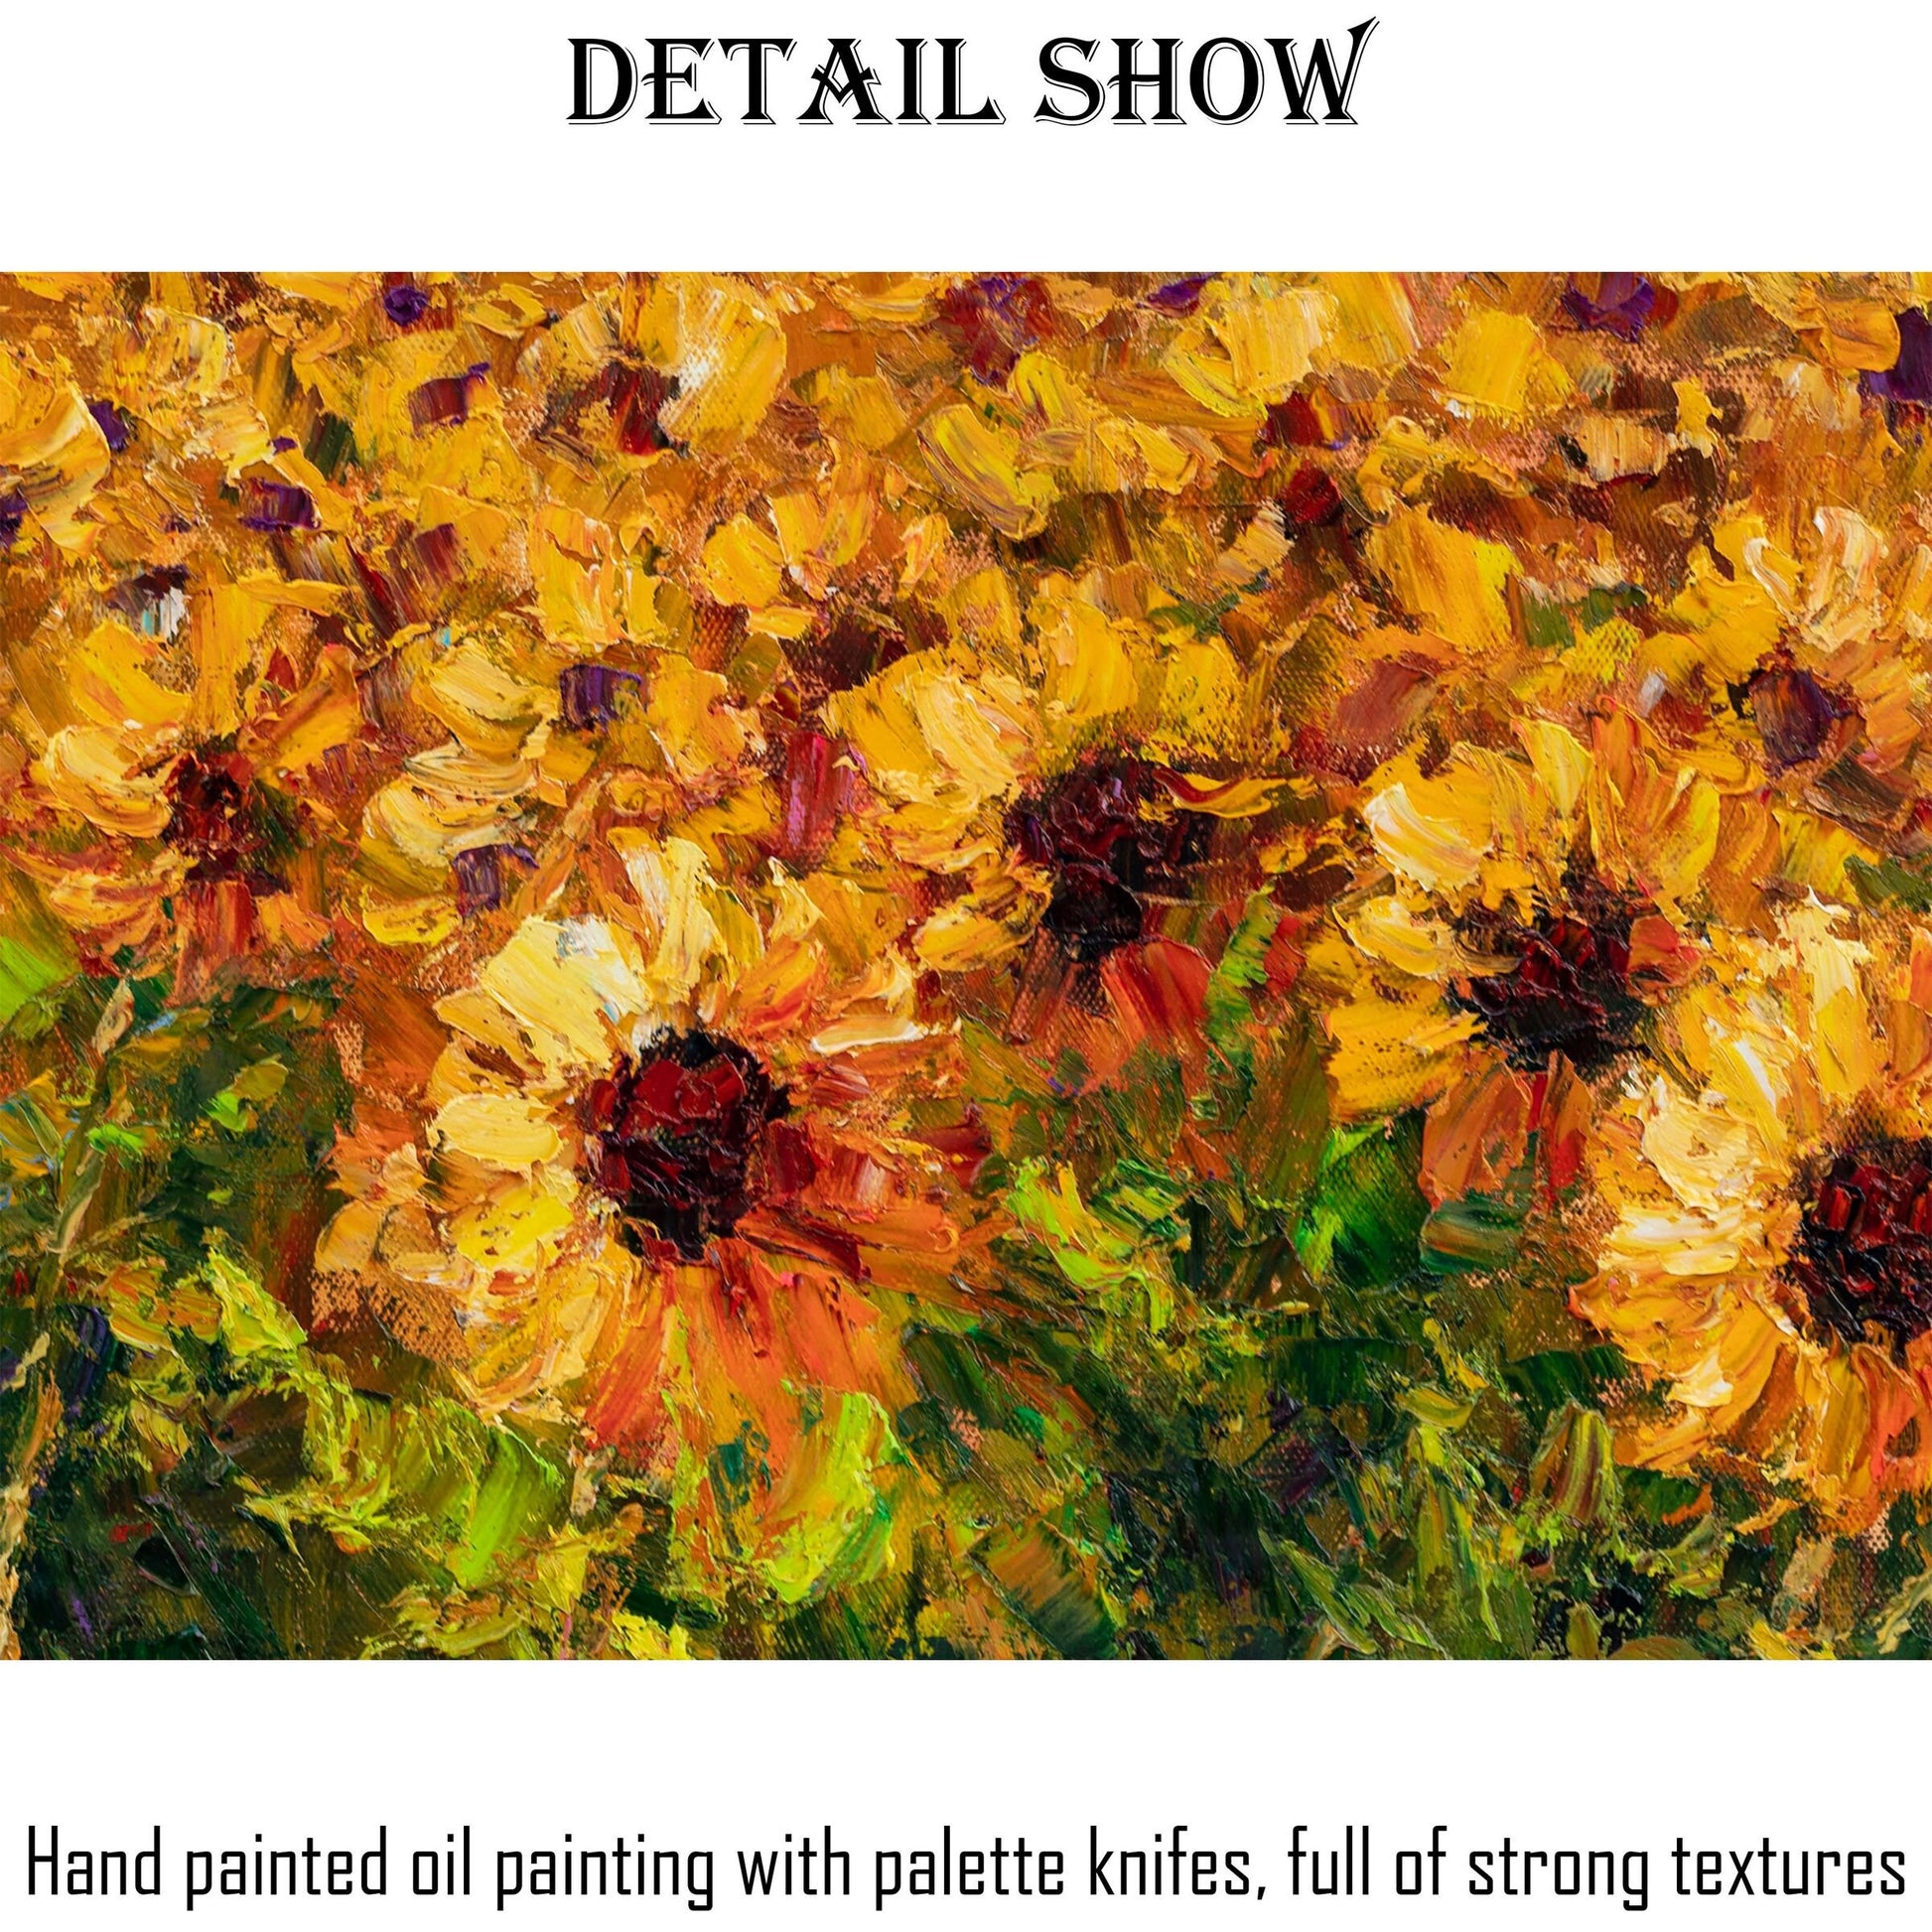 Add Some Charm to Your Home with George Miller's Vibrant Oil Painting of Sunflower Fields - Ready to Hang 32x48-Inches, Housewarming Gift